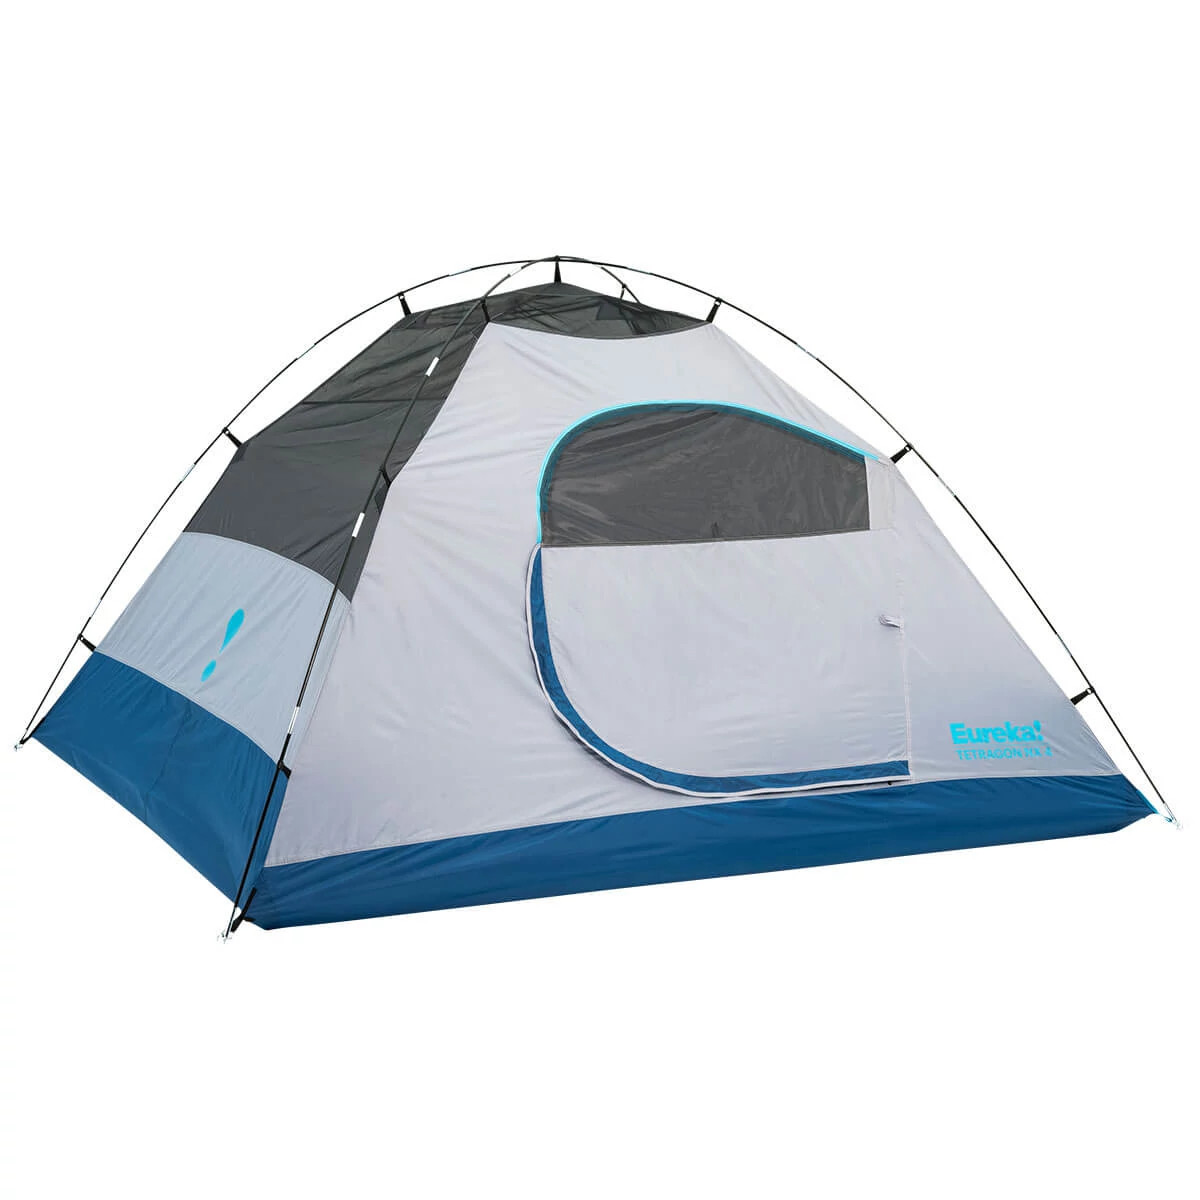 Tetragon NX 4 tent without rainfly